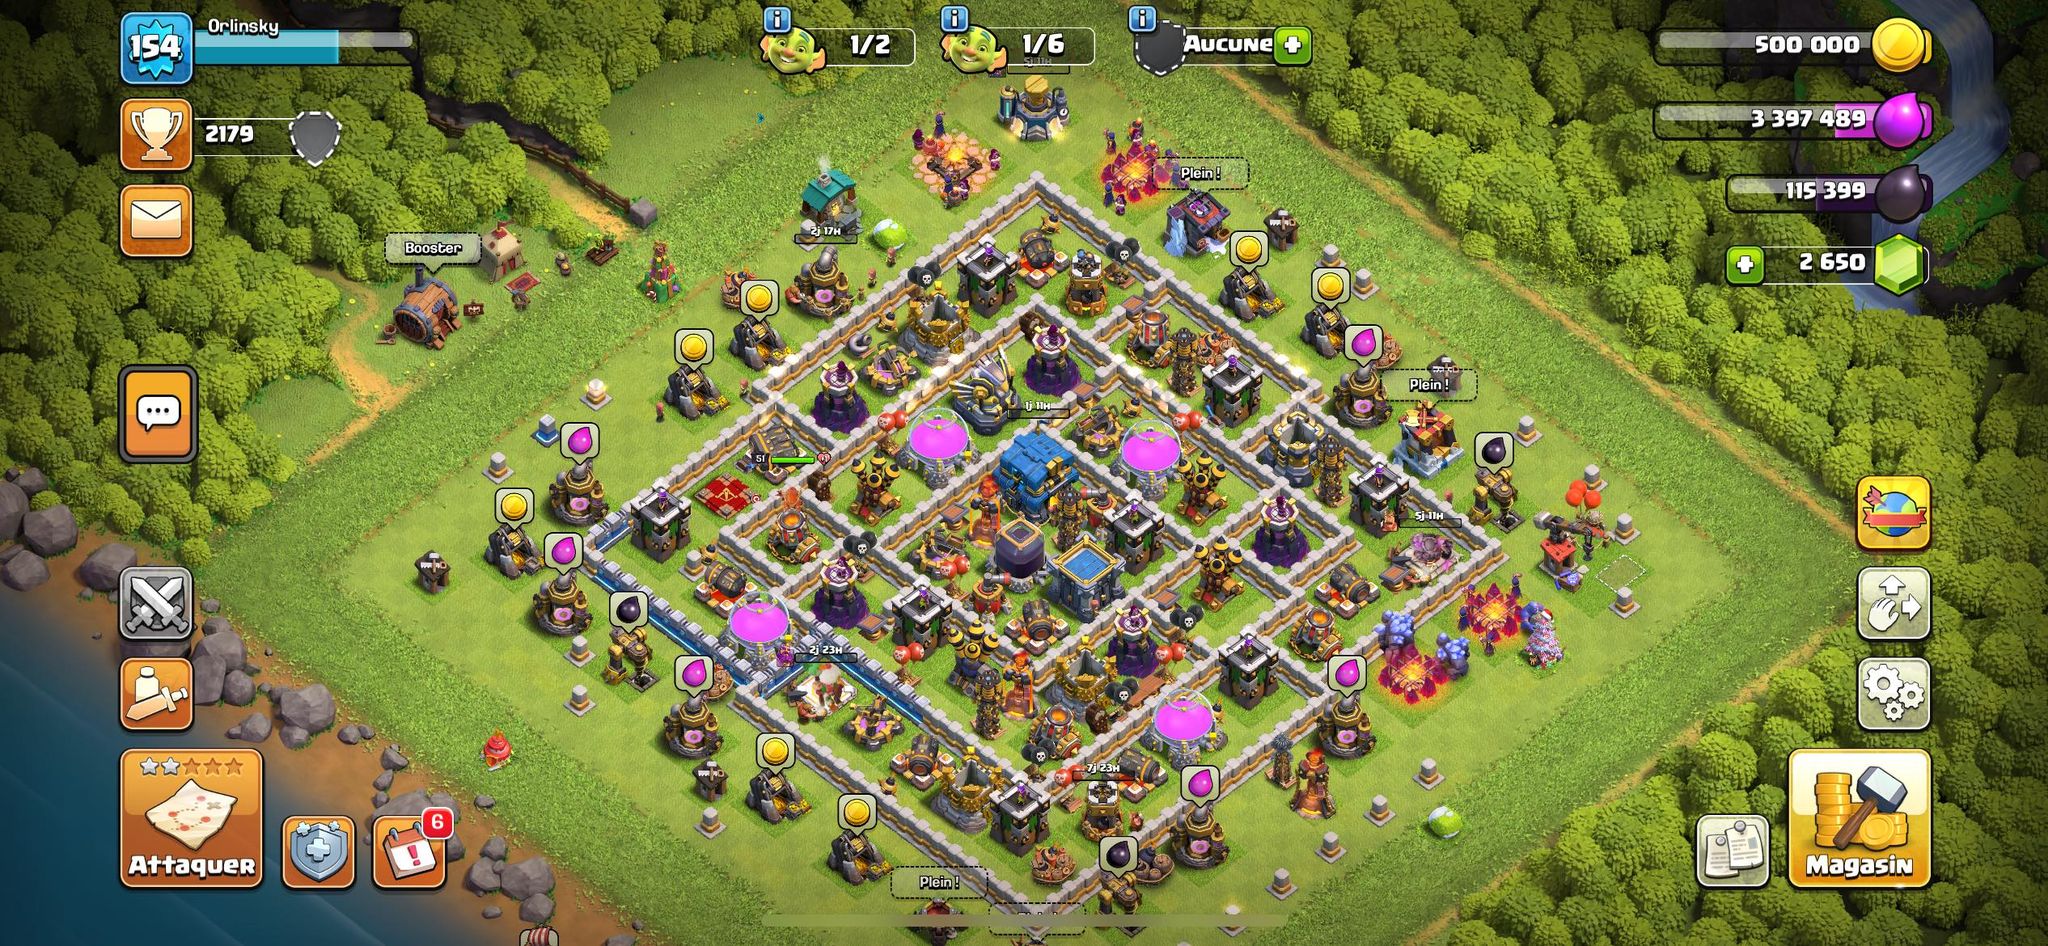 Th12 (2650gems) change name YES